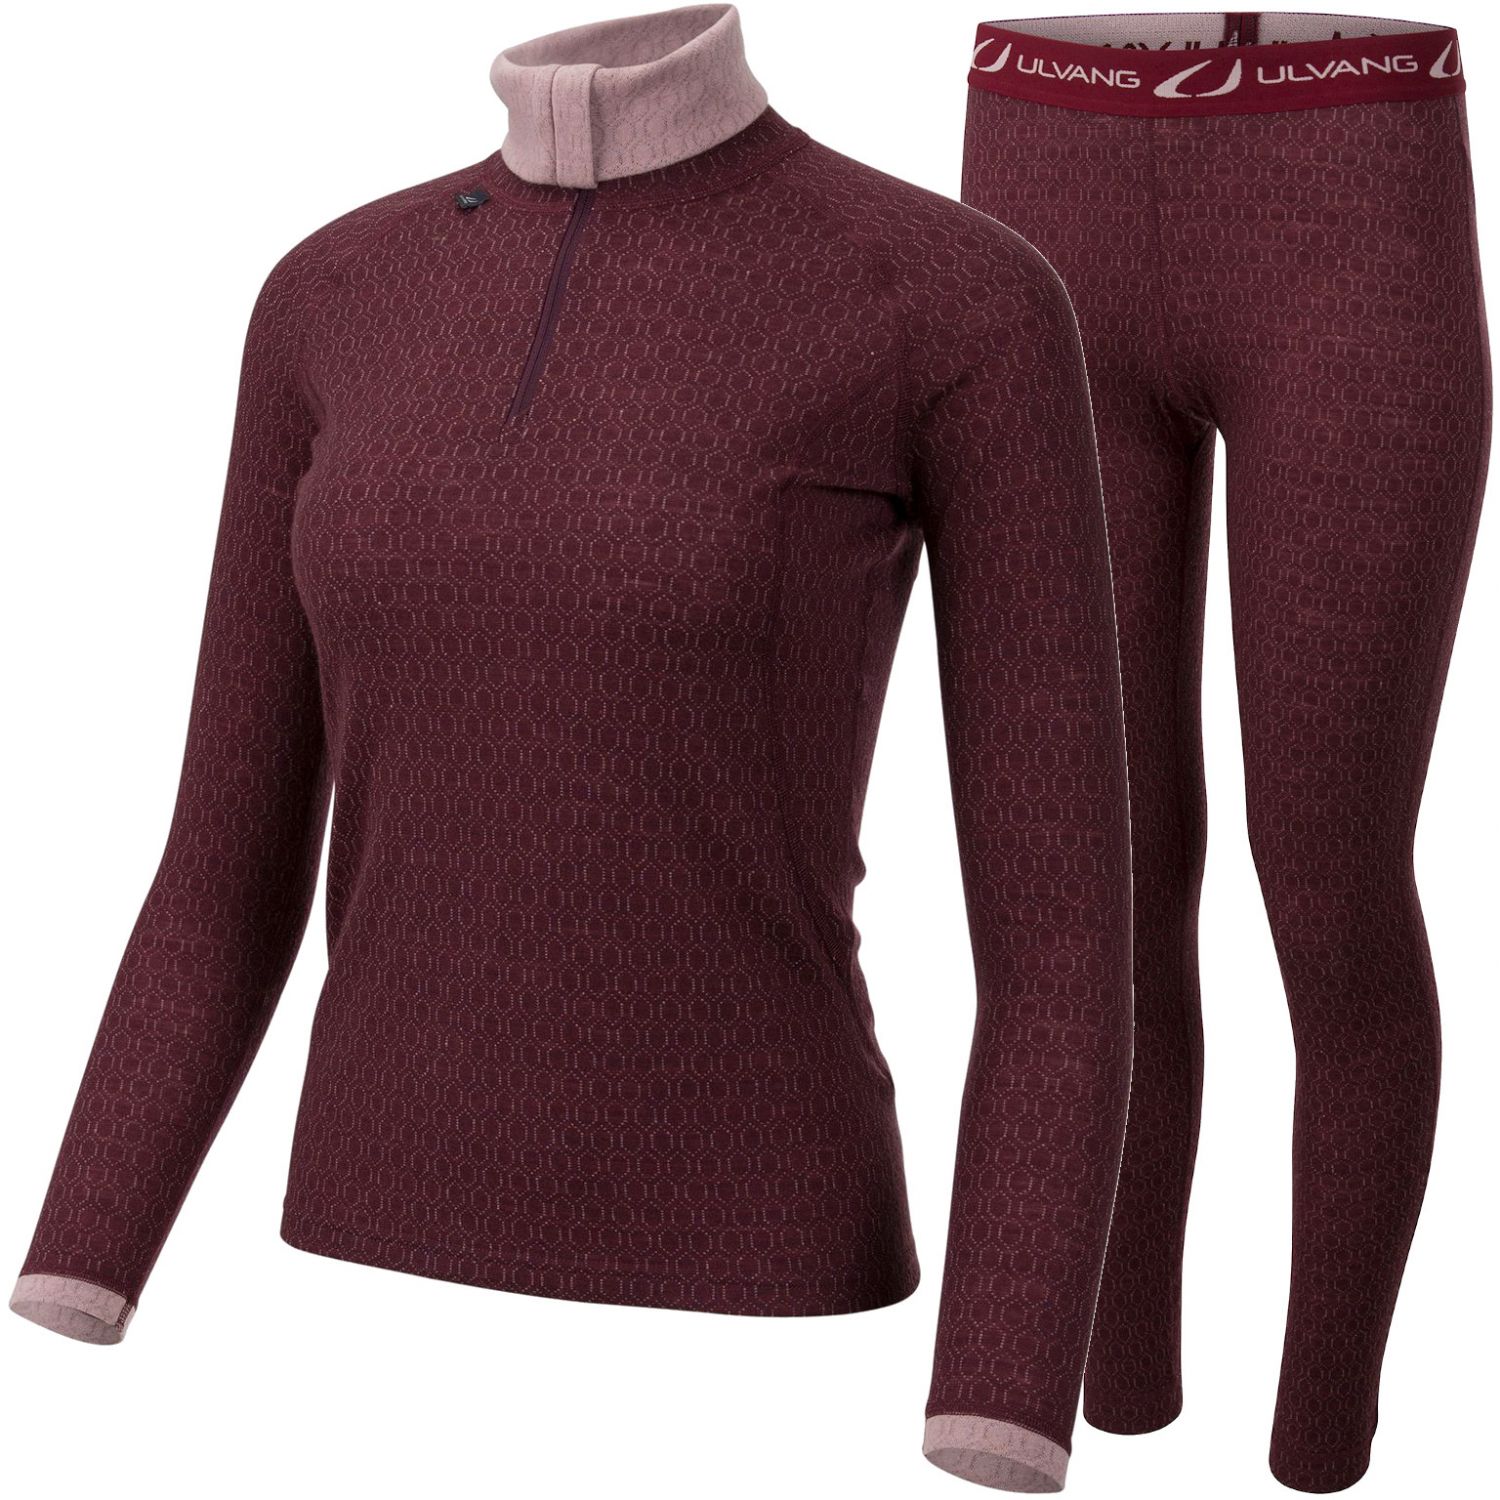 Ulvang 50Fifty 2.0 Turtle Neck, Dame, Bordeaux